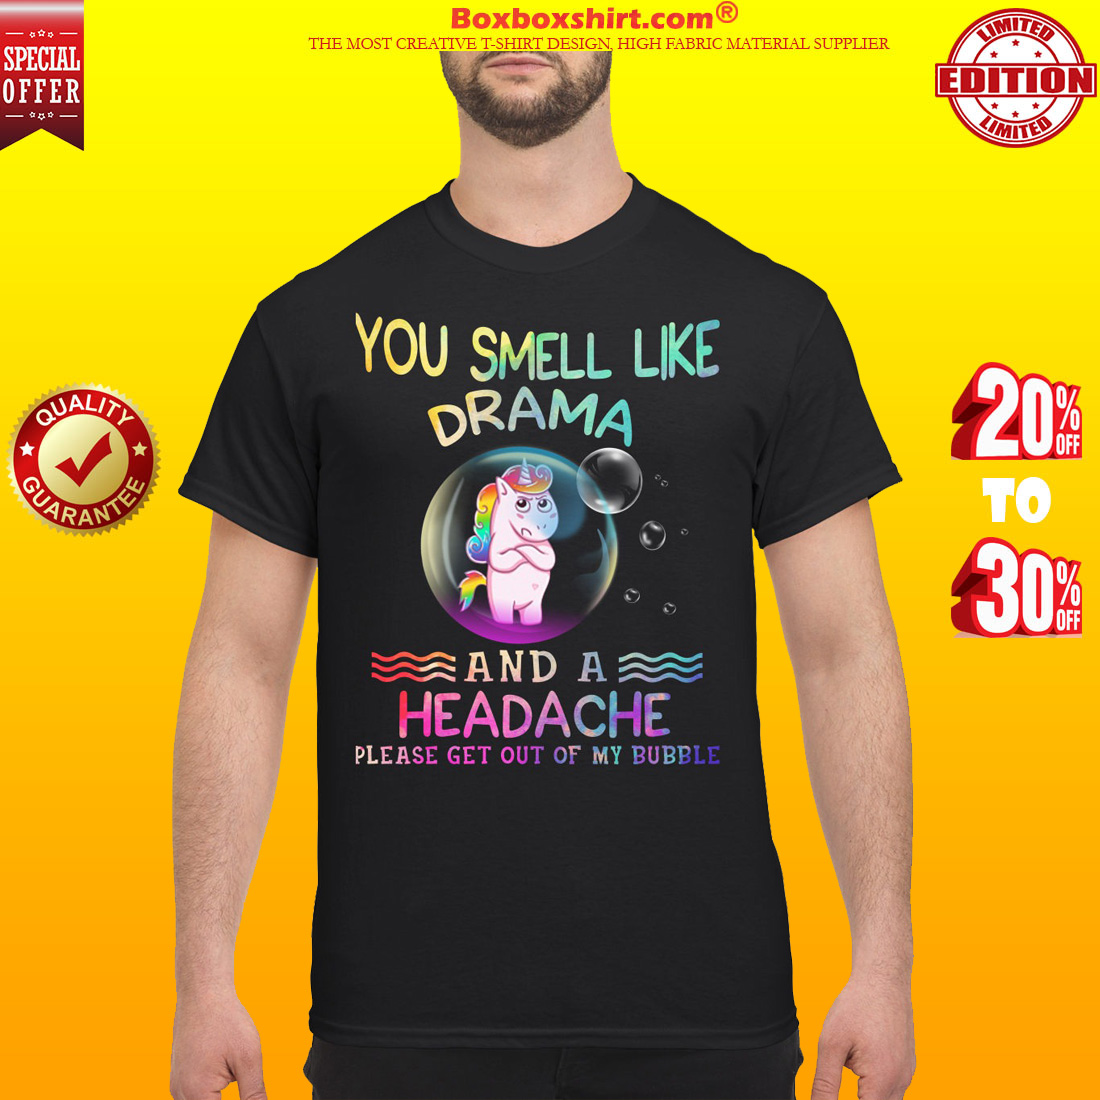 Unicorn you smell like drama and a headache get out of my bubble classic shirt